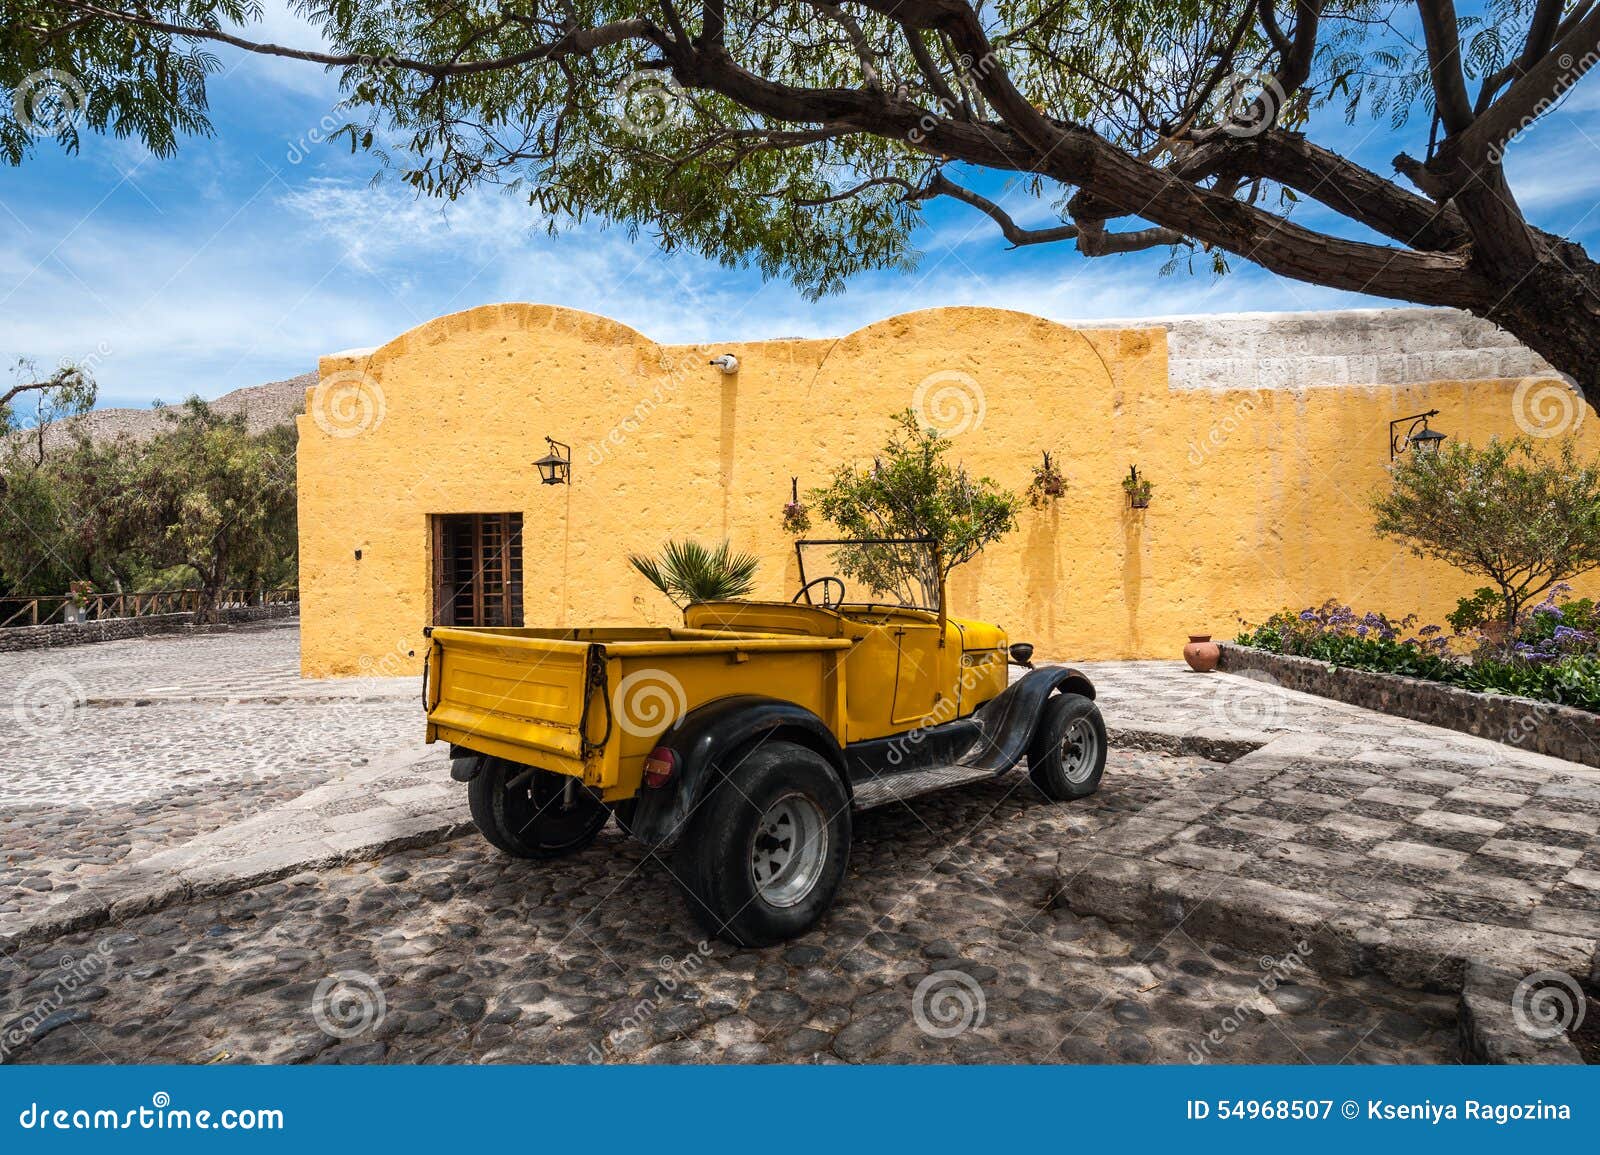 old spanish colonial mansion, arequipa, peru